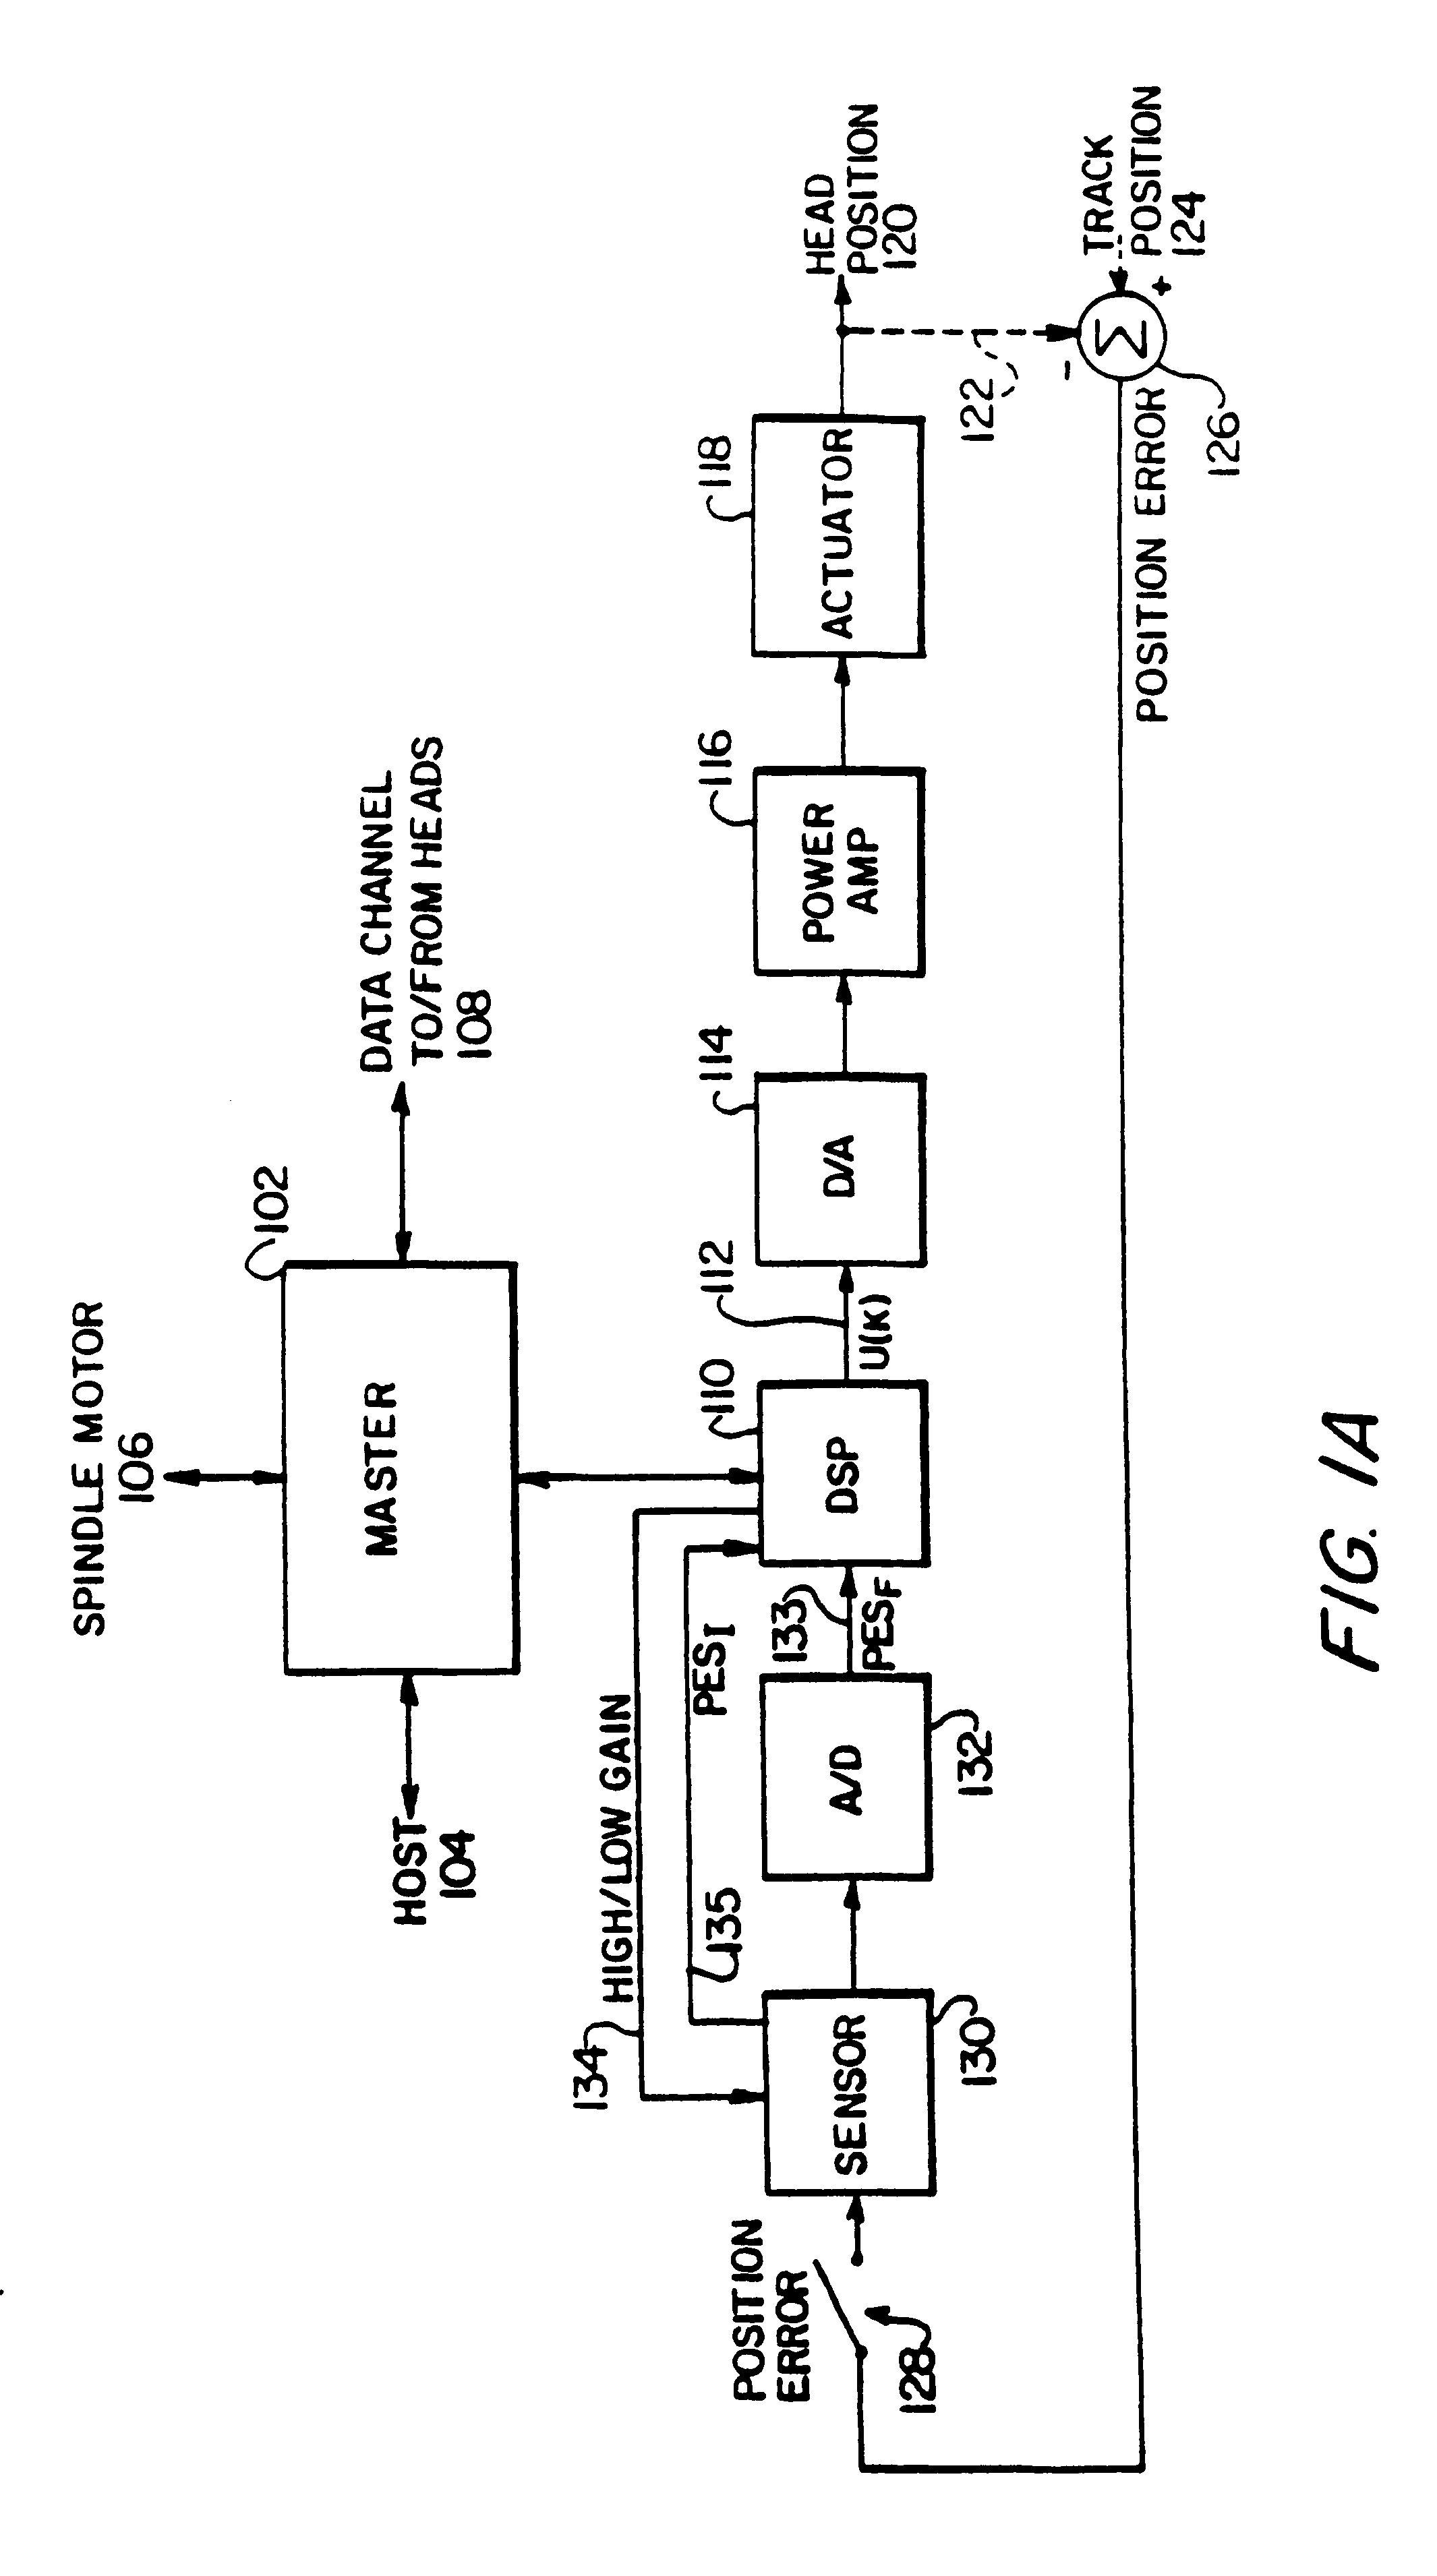 Digital servo control system for use in disk drives